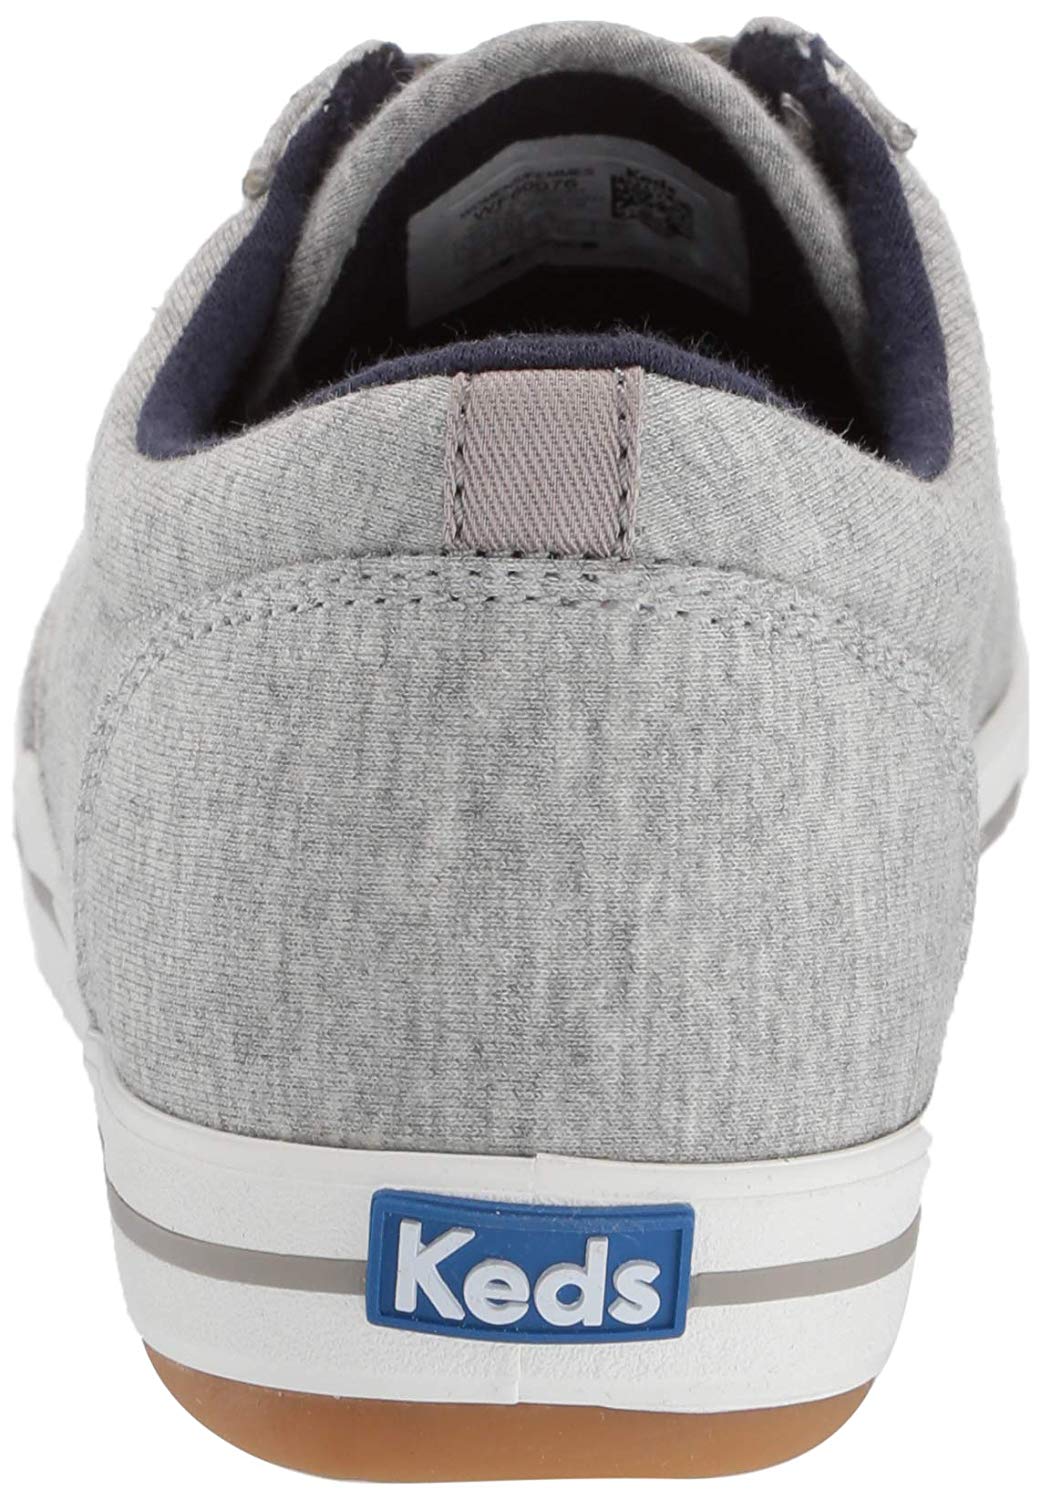 keds courty women's sneakers